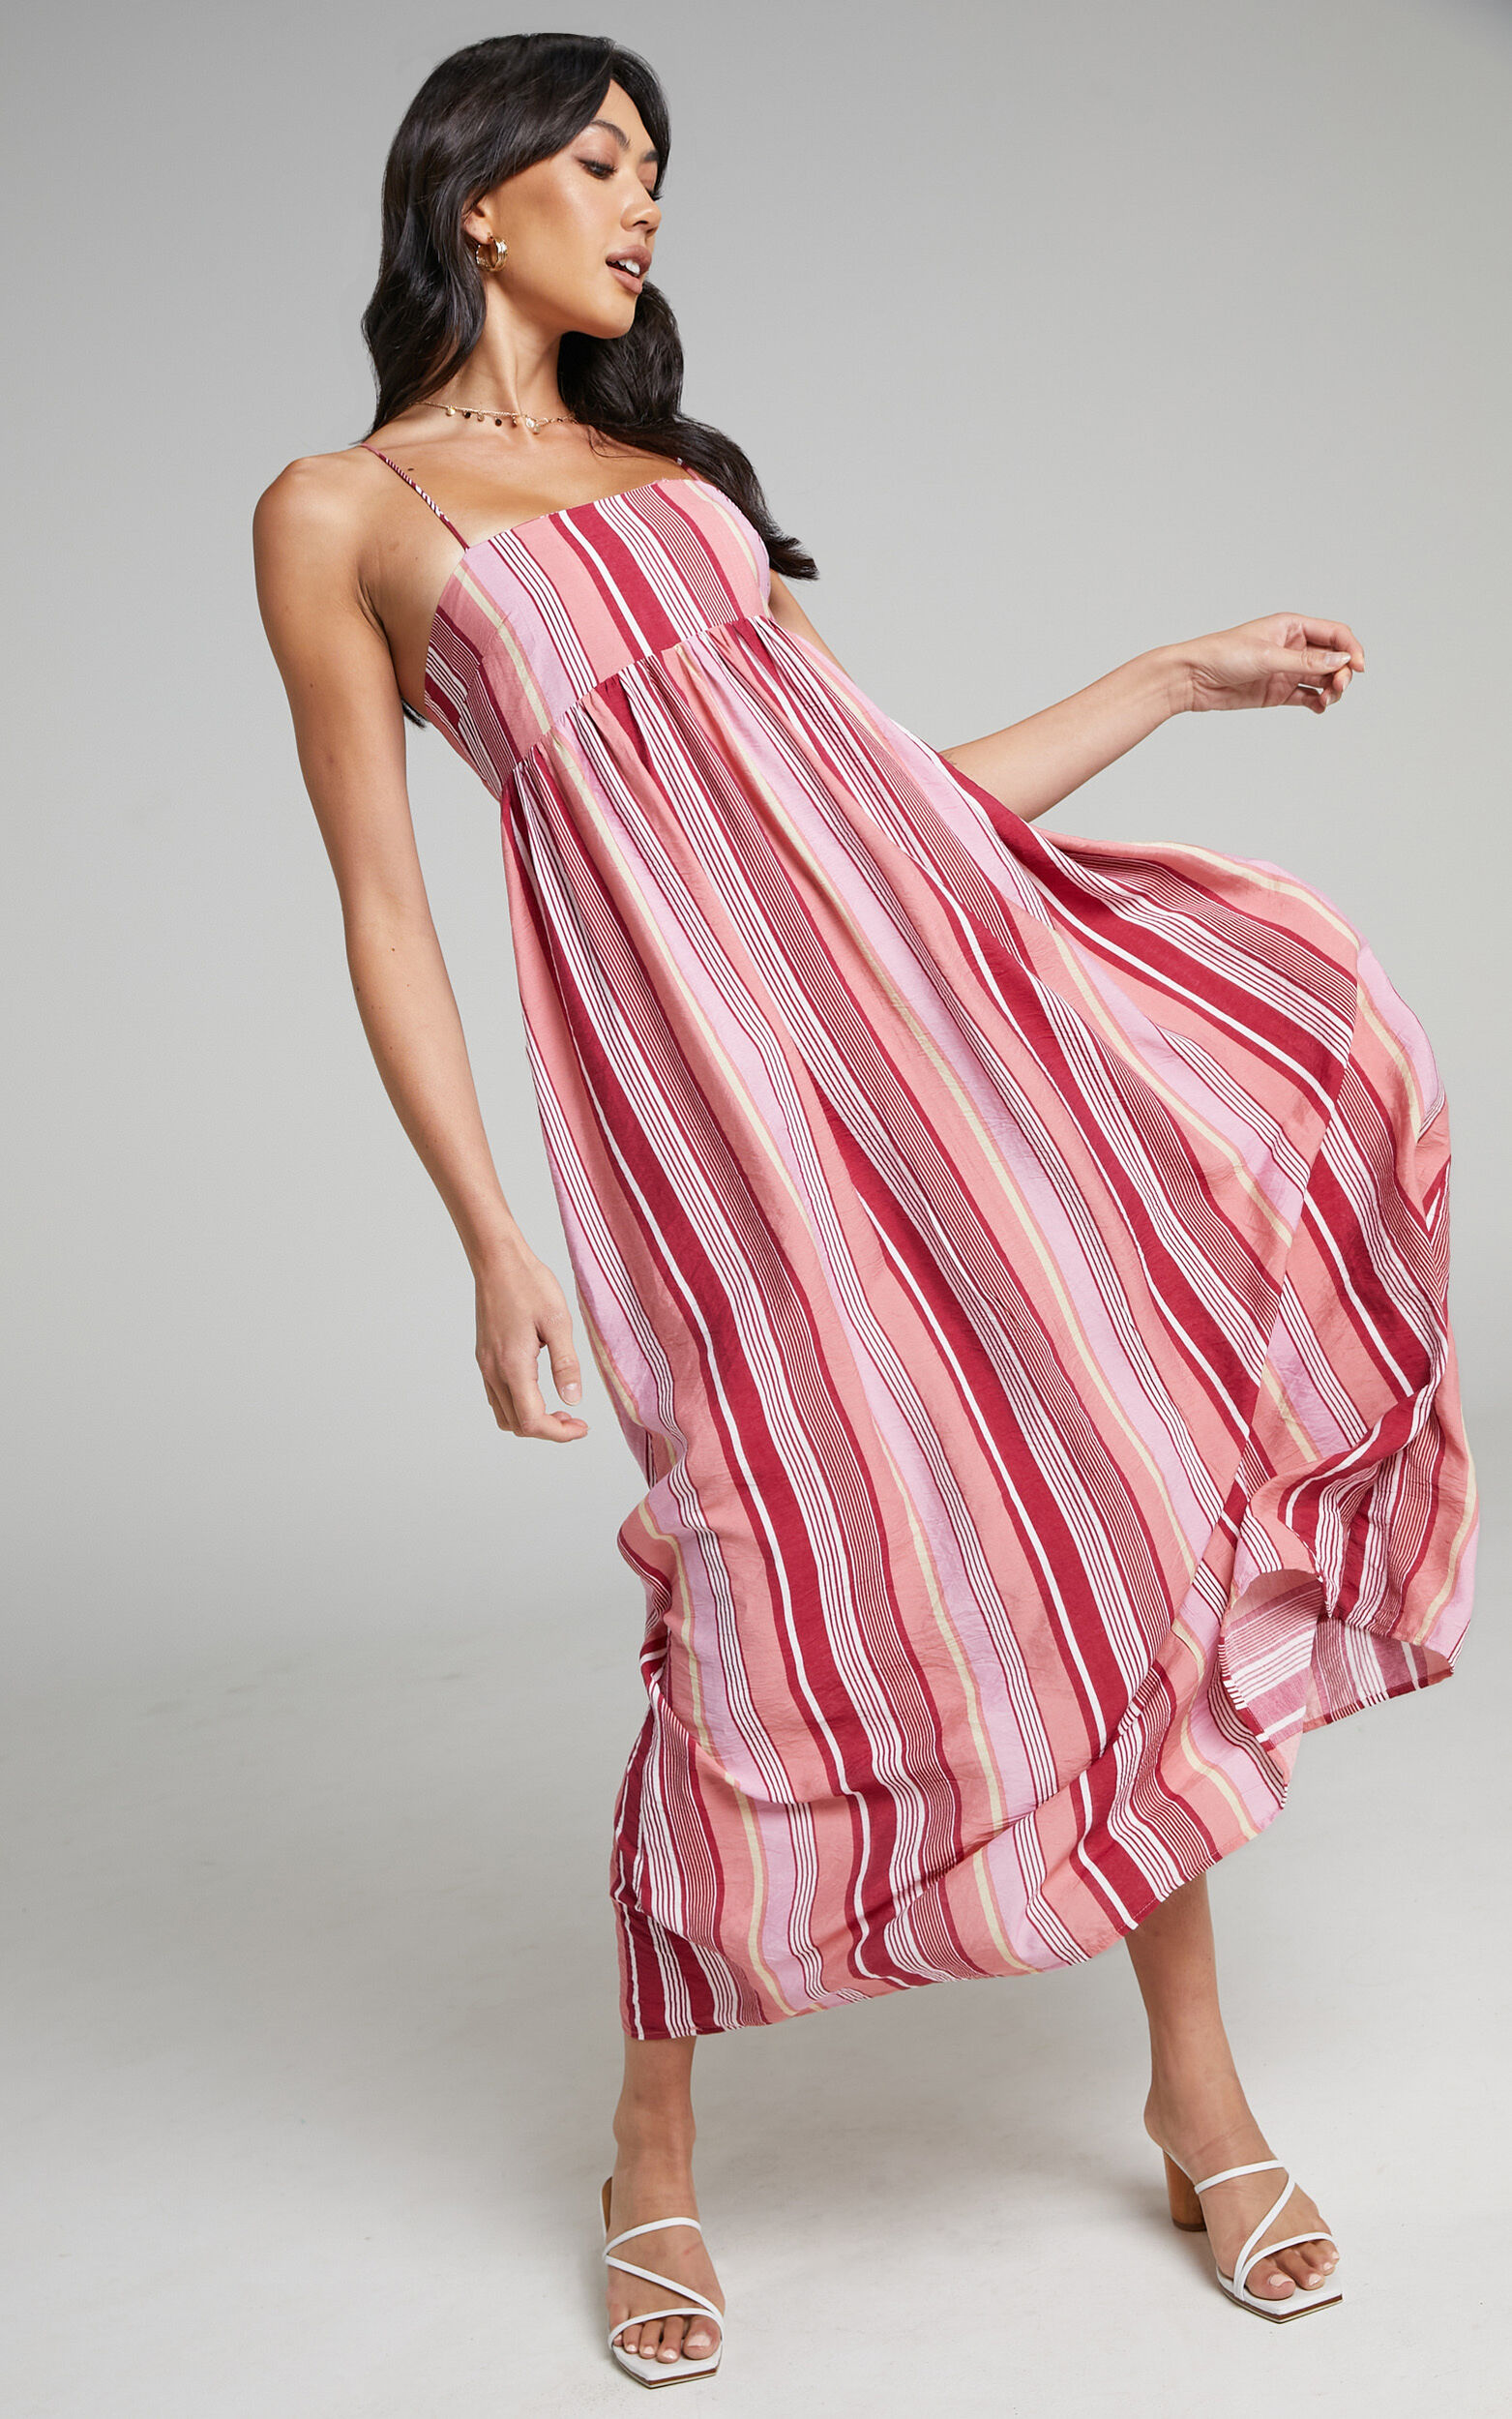 Chelcy Striped Open Back Maxi Dress in Pink - 04, PNK1, super-hi-res image number null